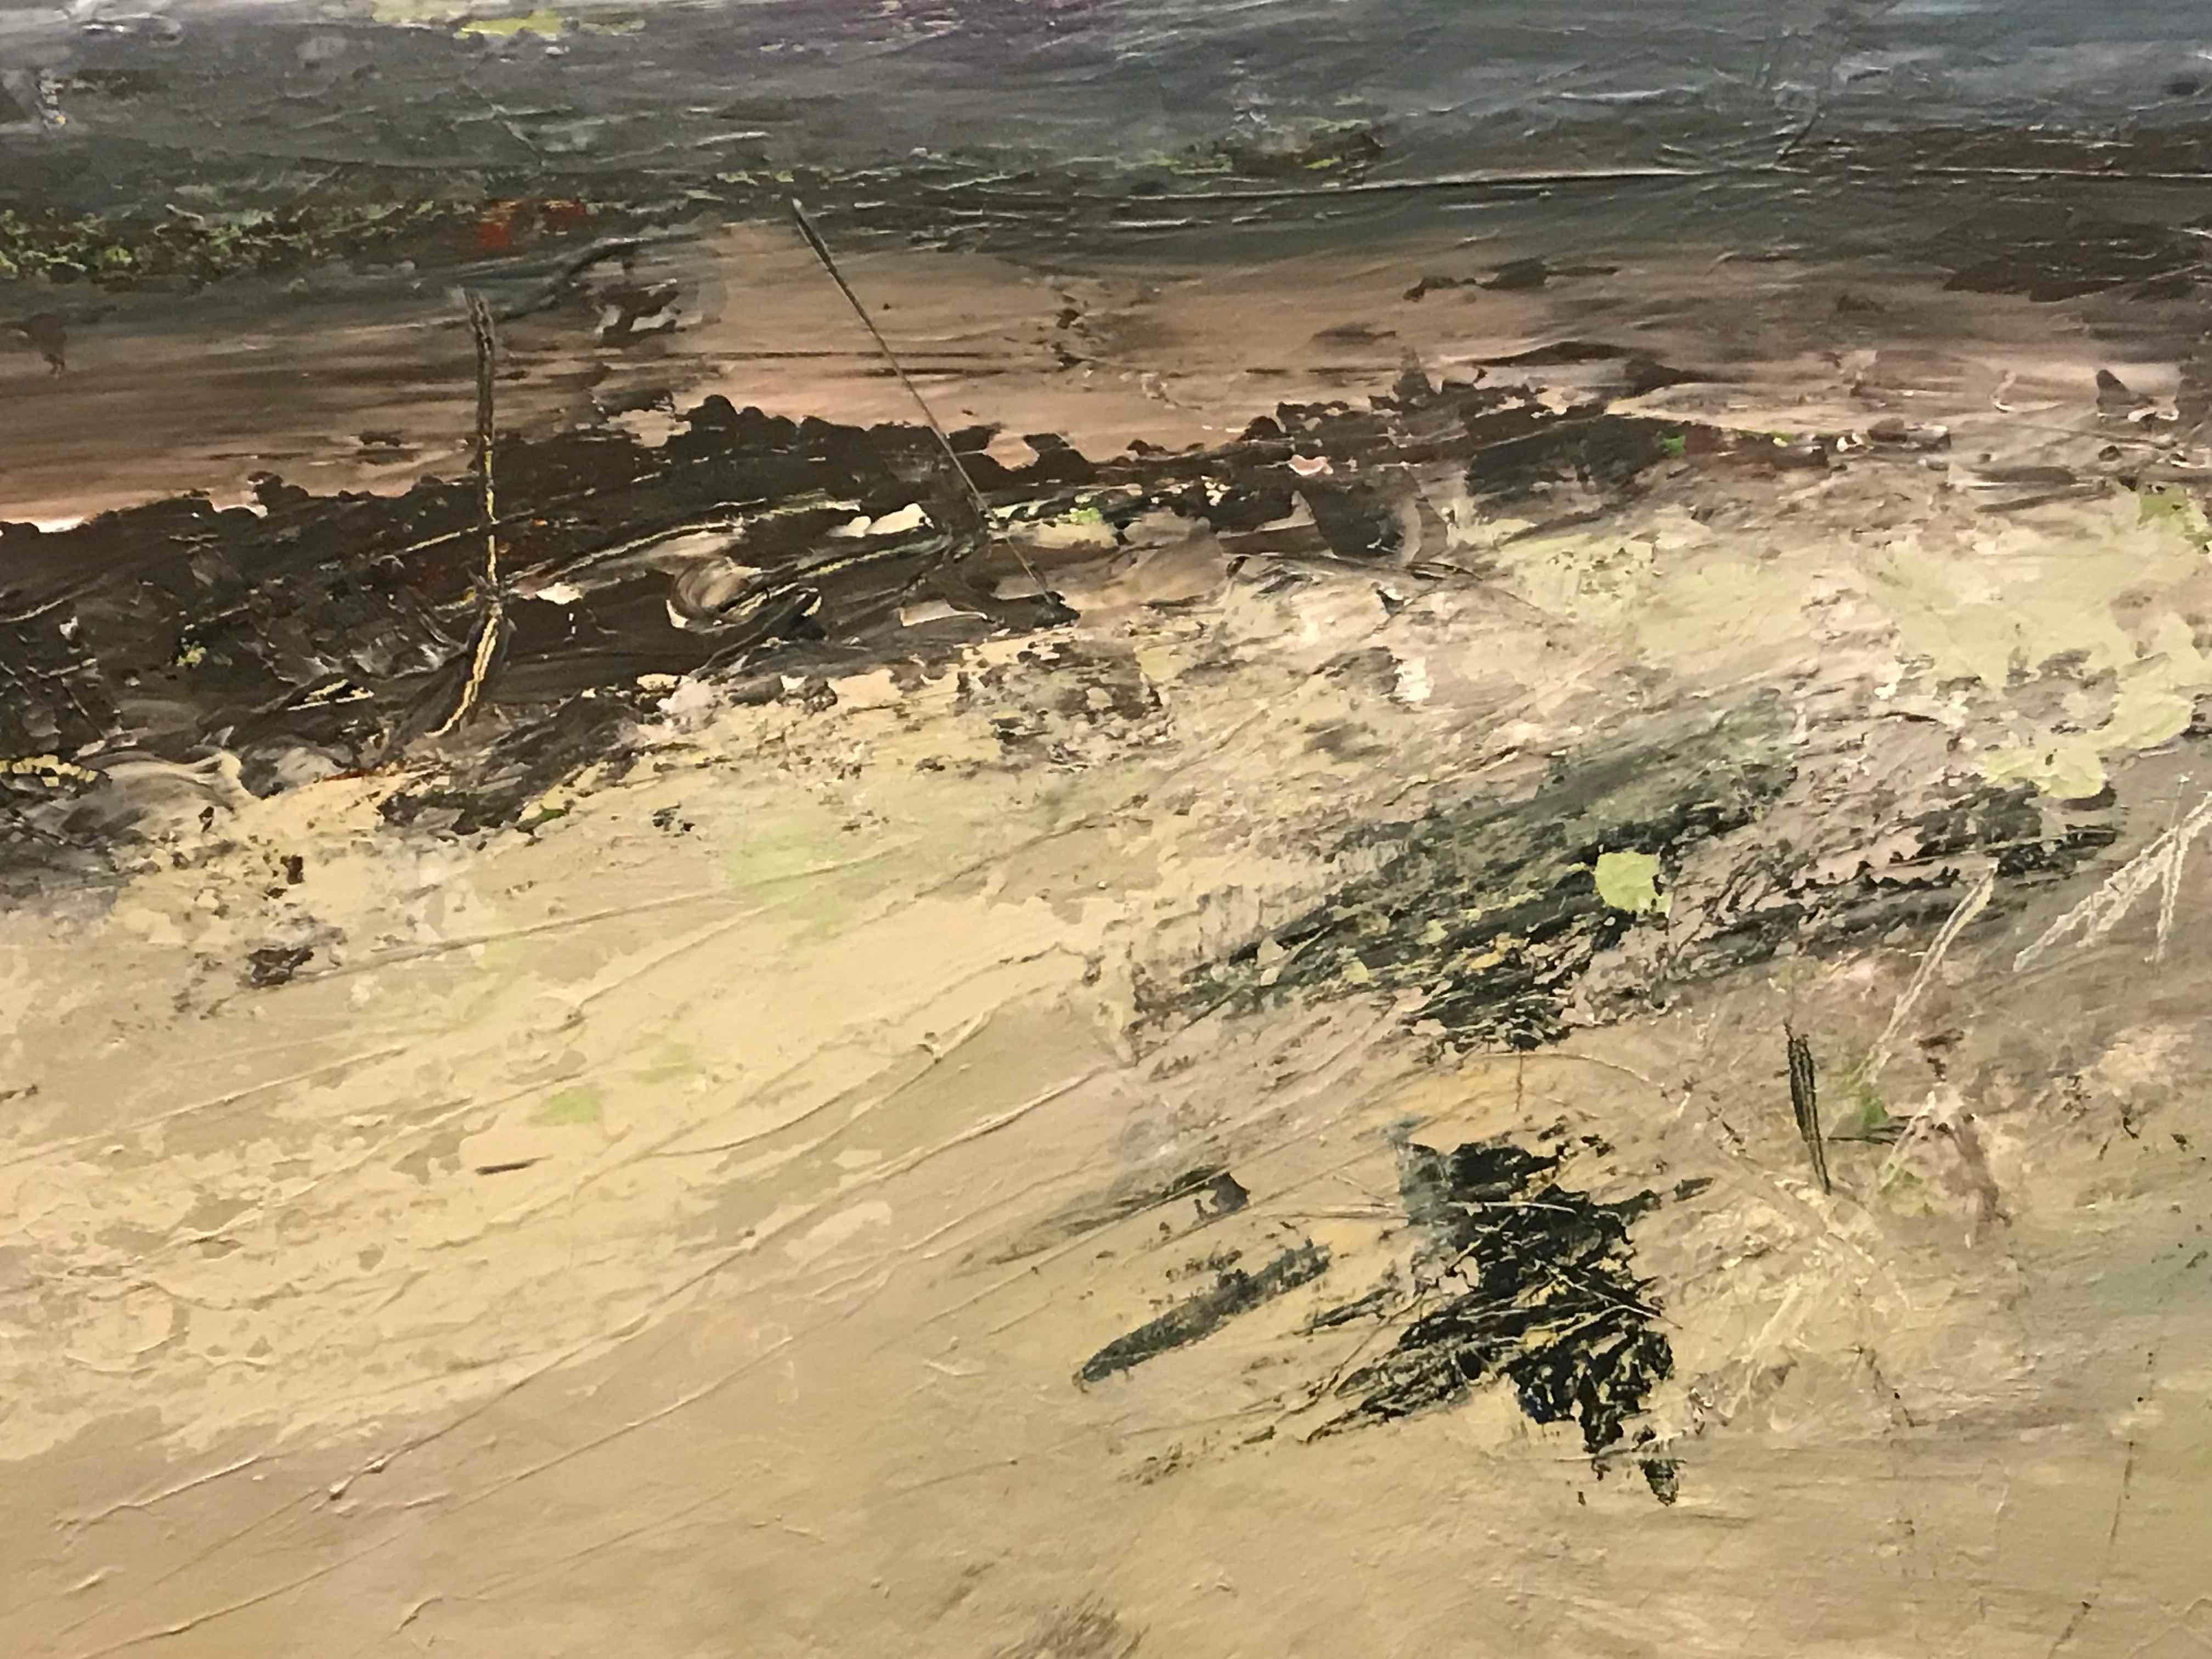 Abstract landscape oil painting on canvas by English artist Robert Eadie. With earthy greens and creamy yellows, Eadie depicts a stretch of sand and the scrubby beach dunes surrounding with fantastic proportions and a soft meditative